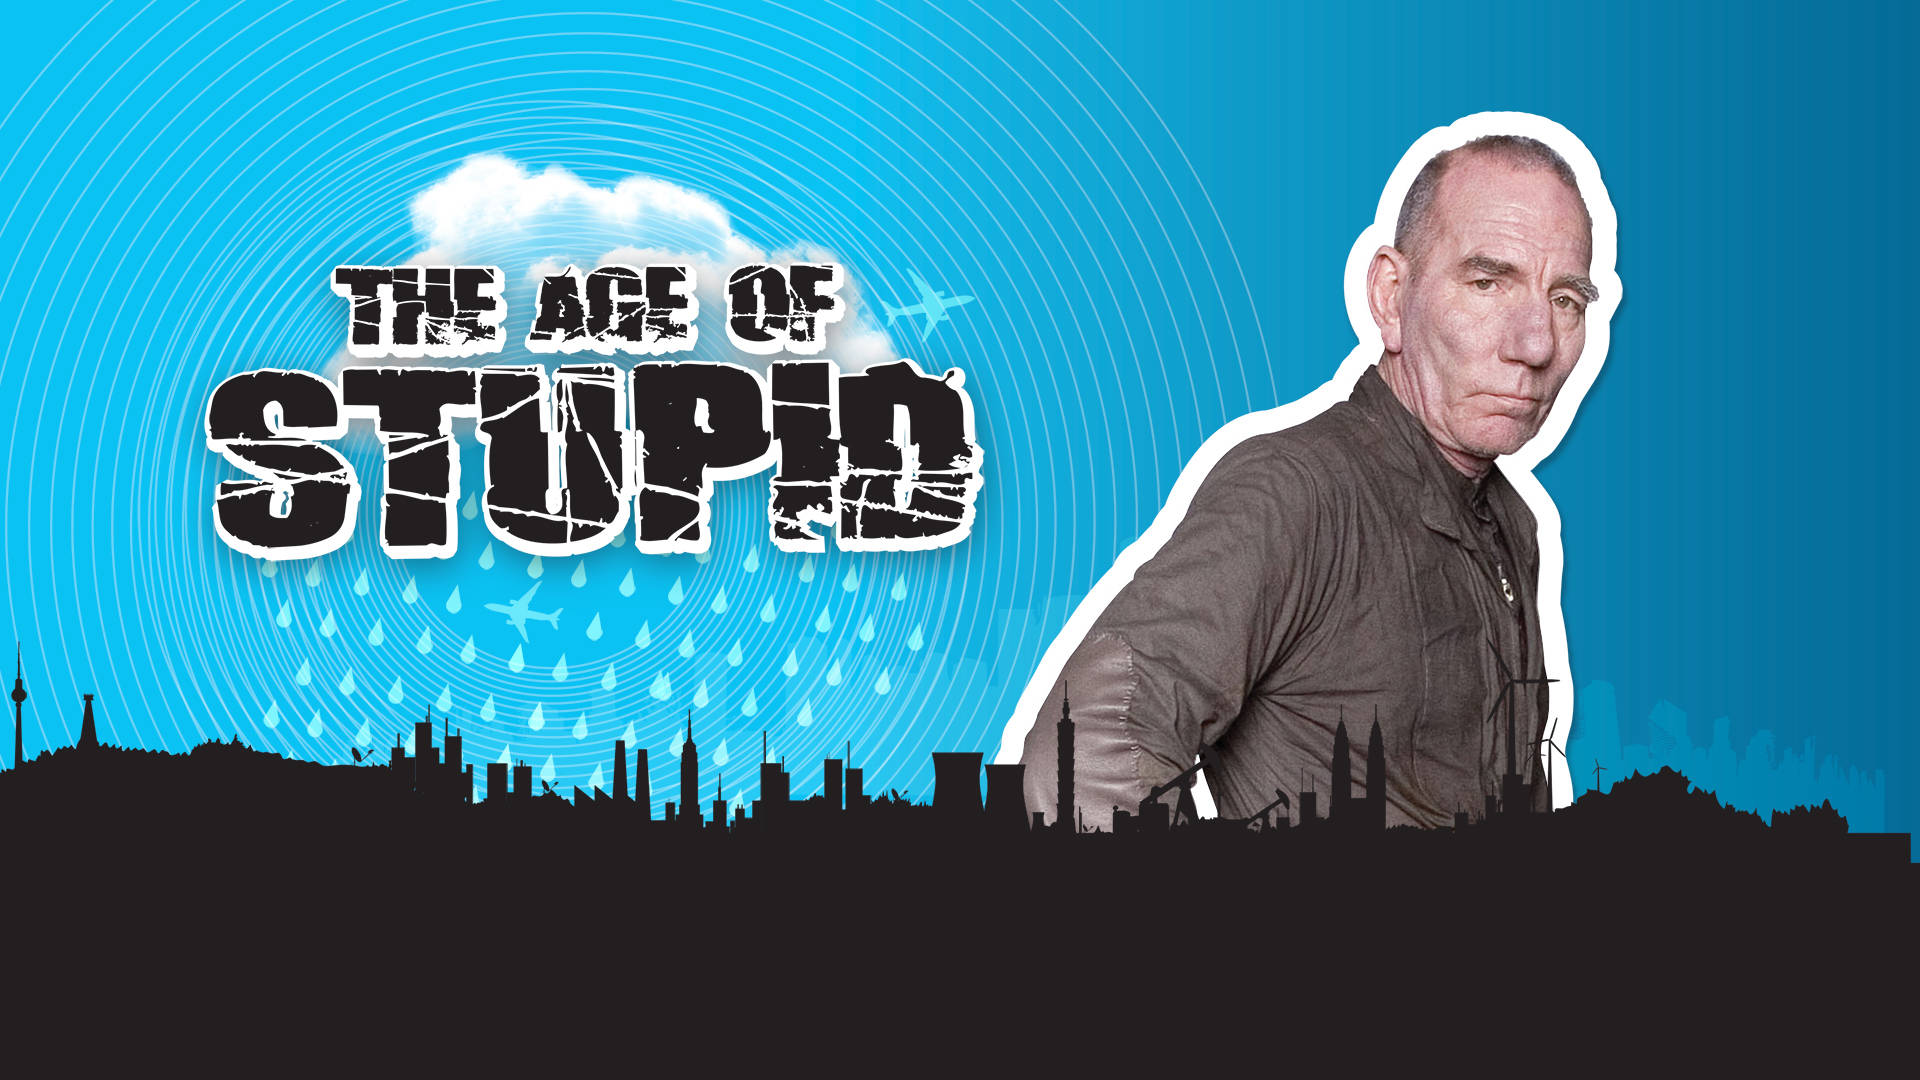 Pete Postlethwaite The Age Of Stupid Poster Wallpaper